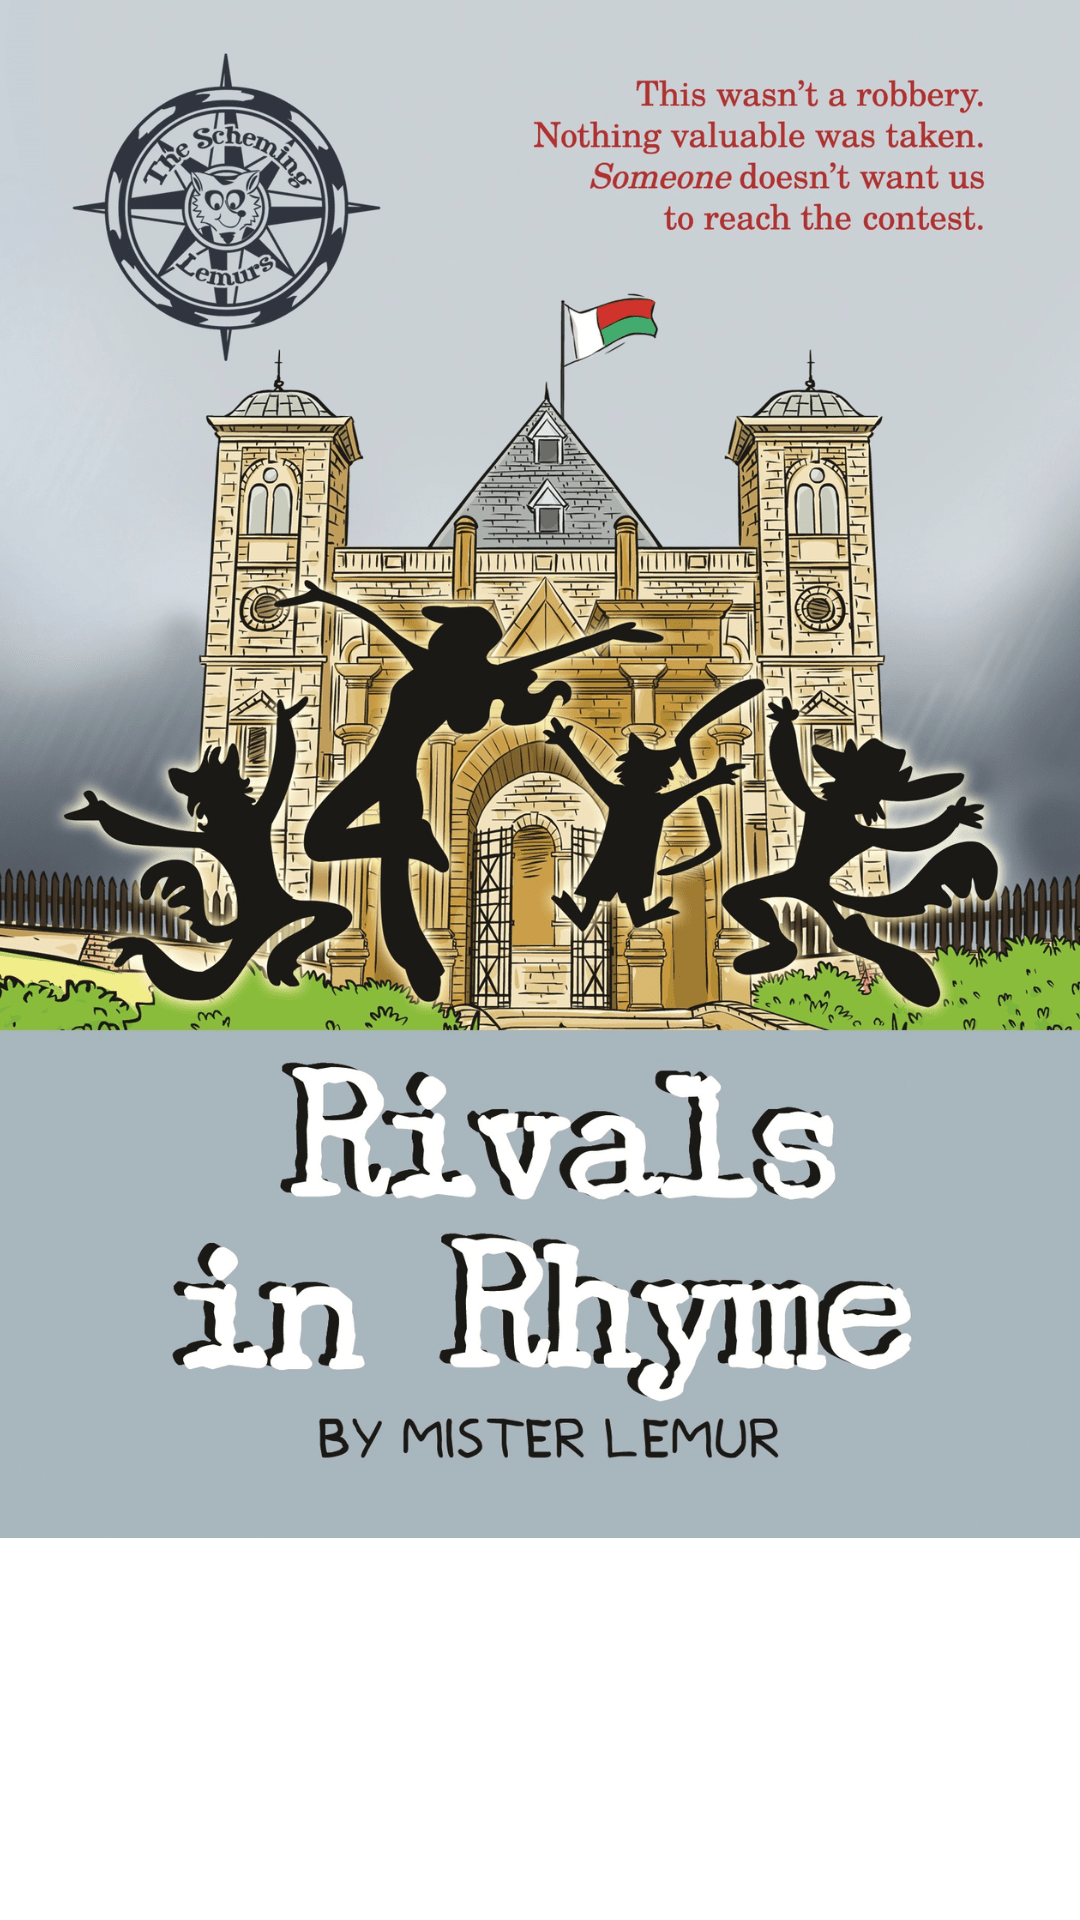 The Scheming Lemurs: Rivals in Rhyme